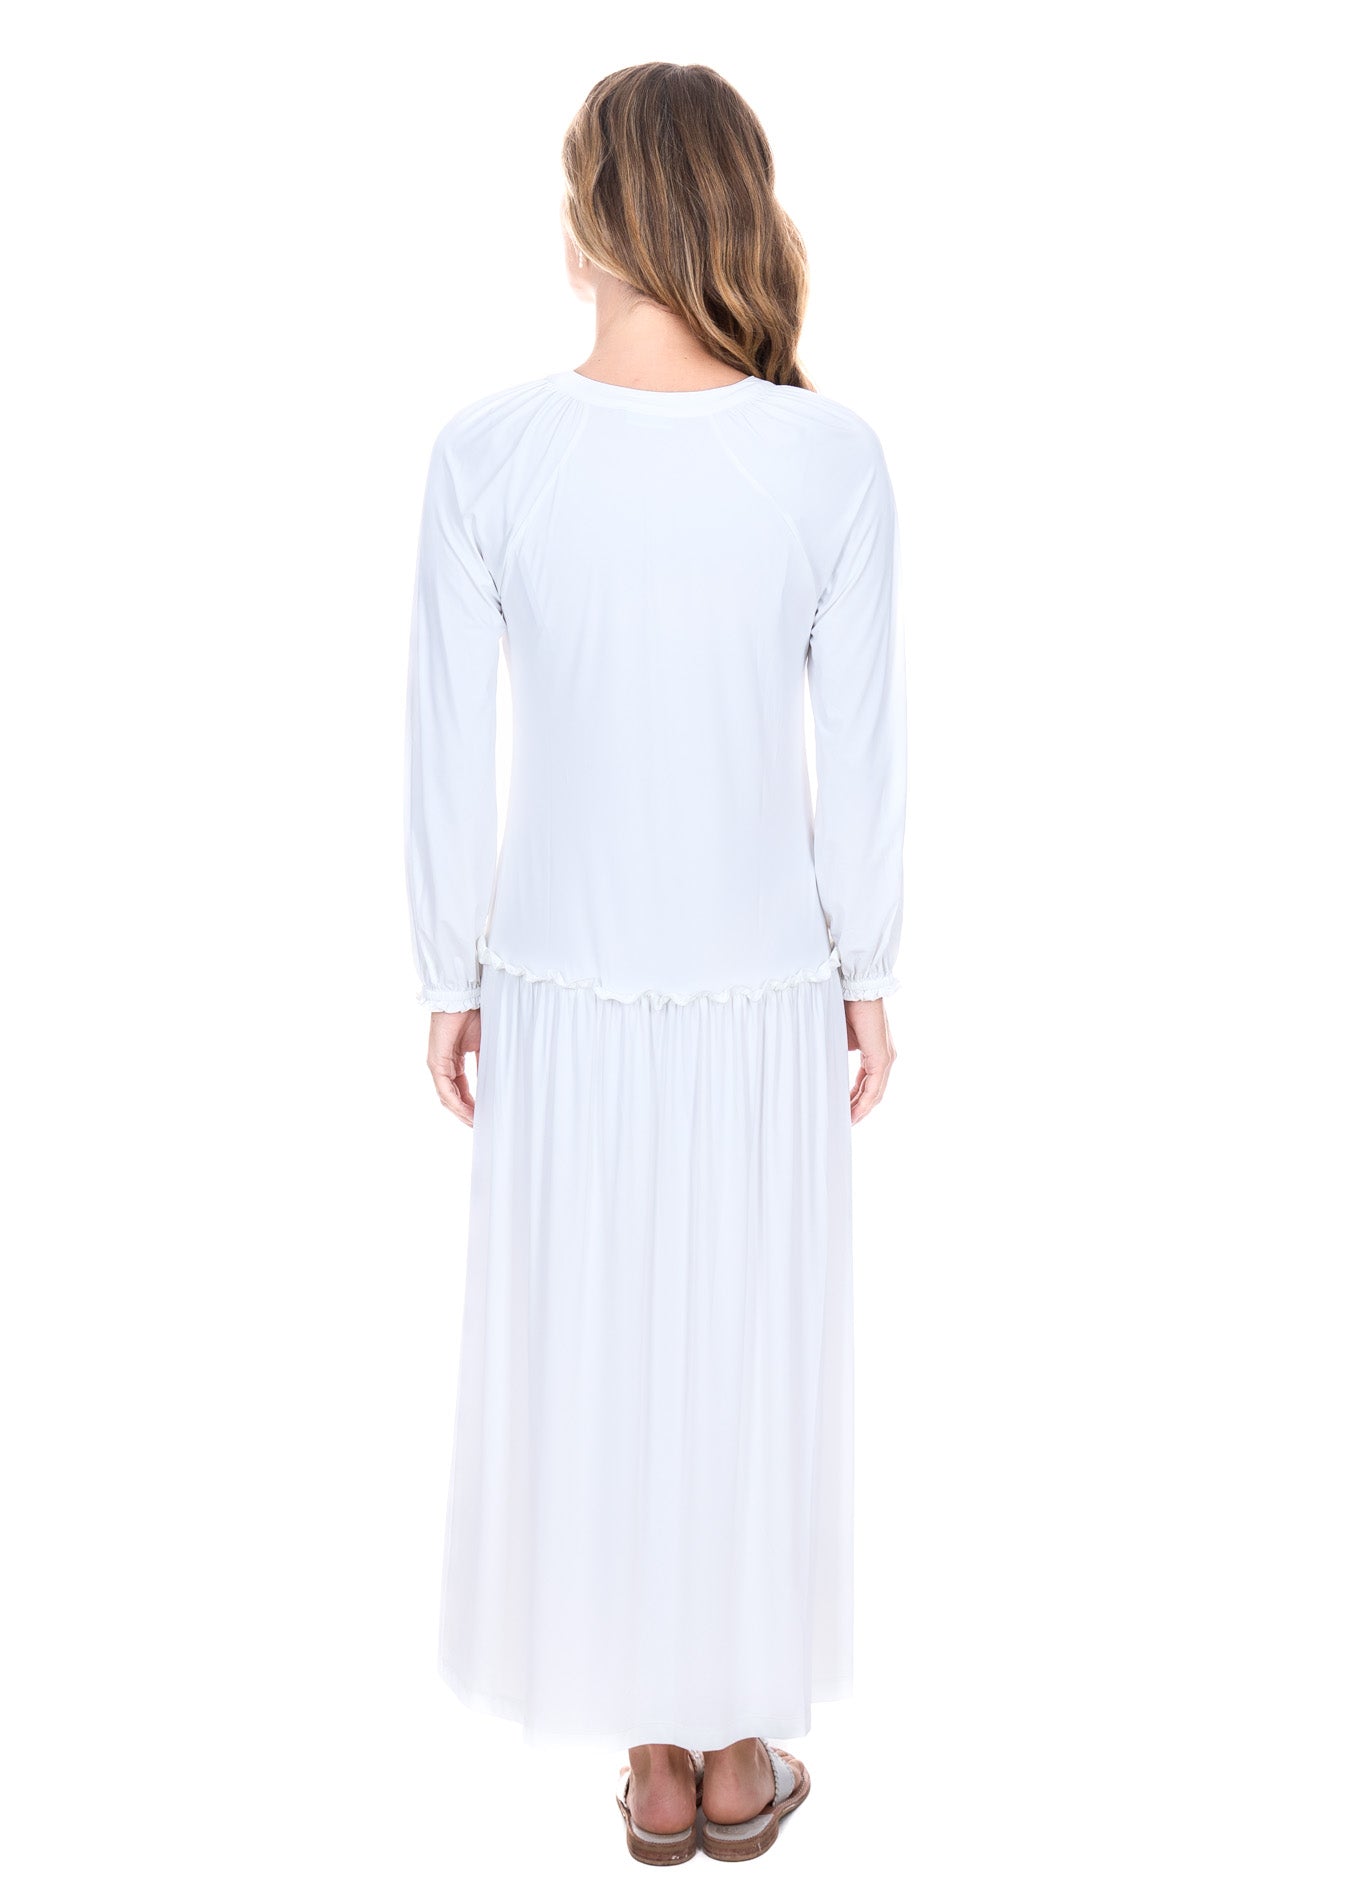 The back view of the flowing, sun protective Cabana Life White Embroidered Tunic Maxi Dress. 